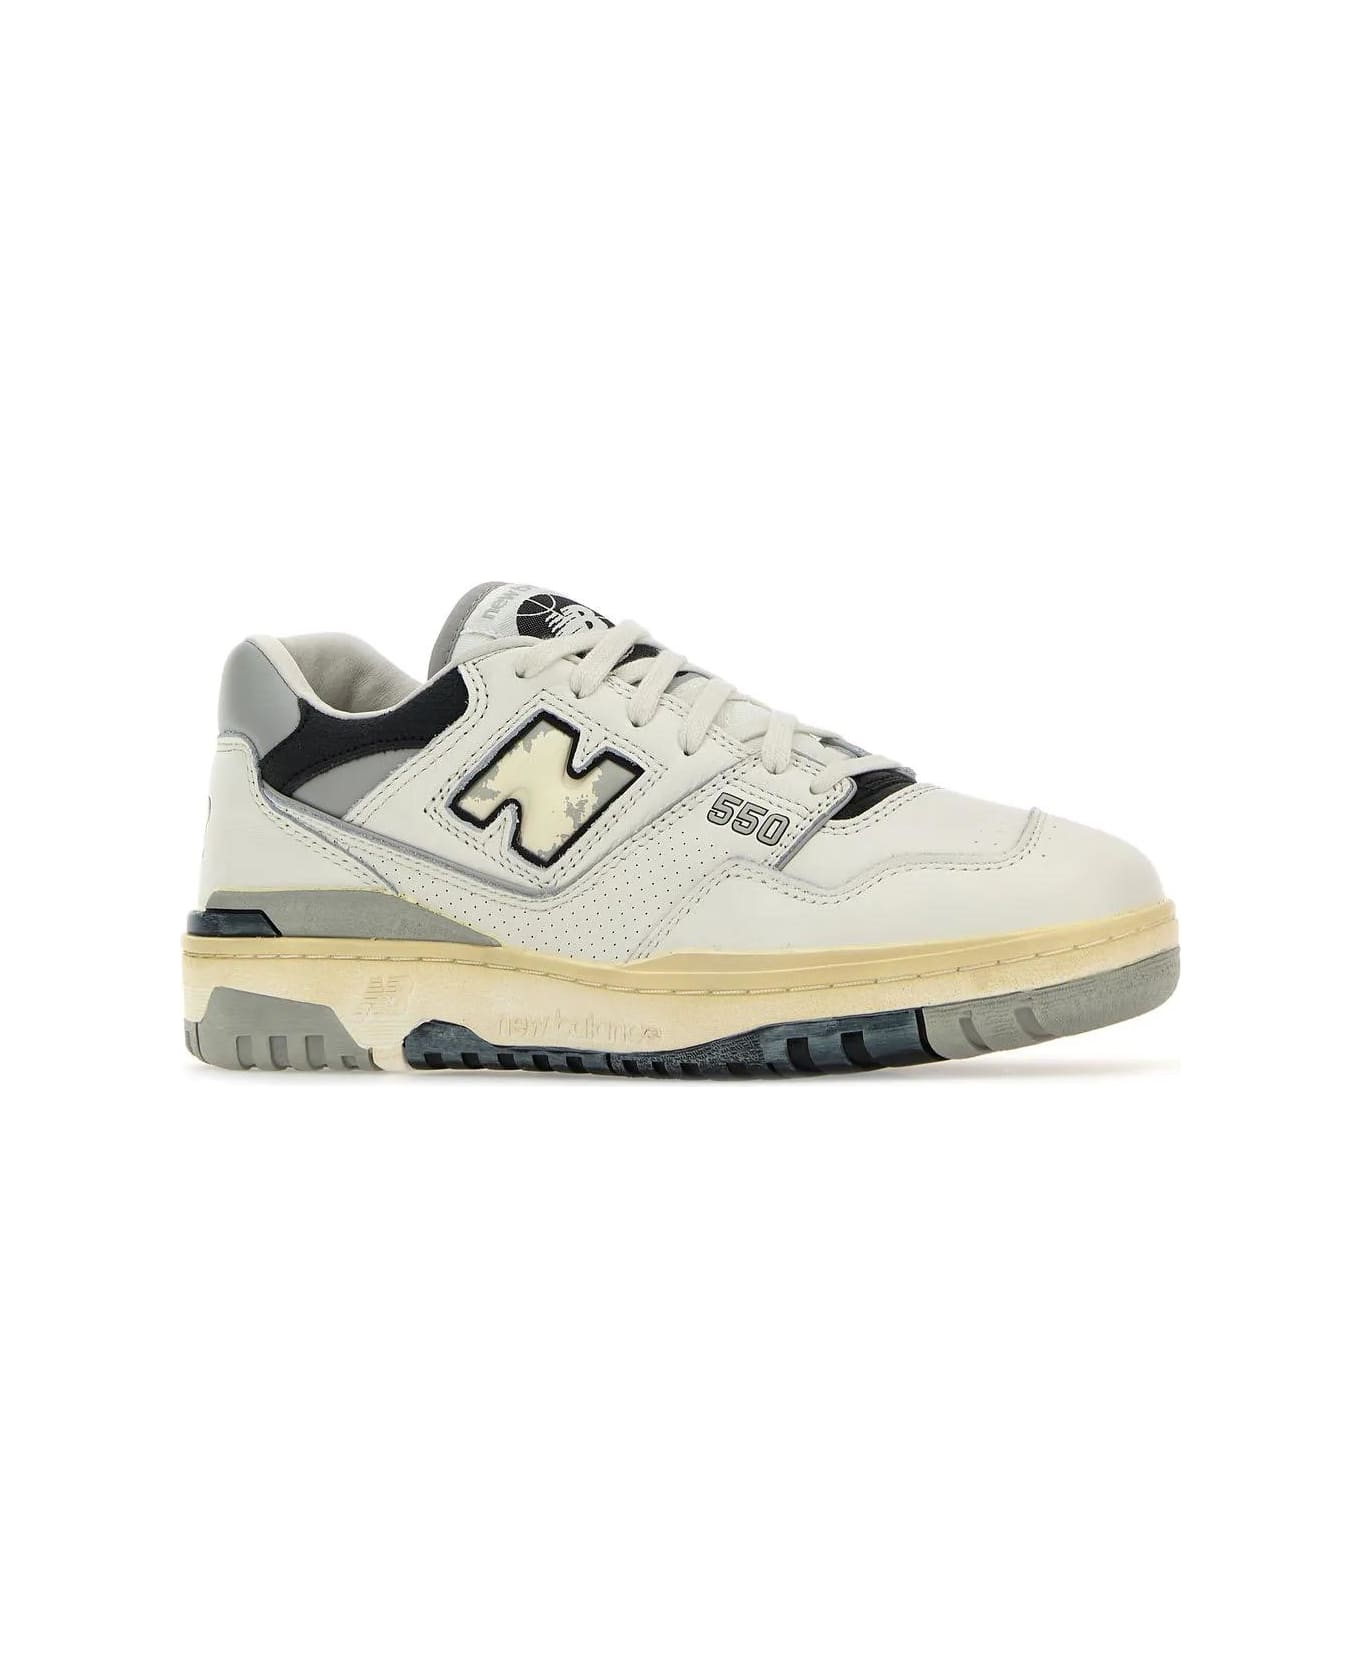 New Balance Multicolor Leather 550 Sneakers